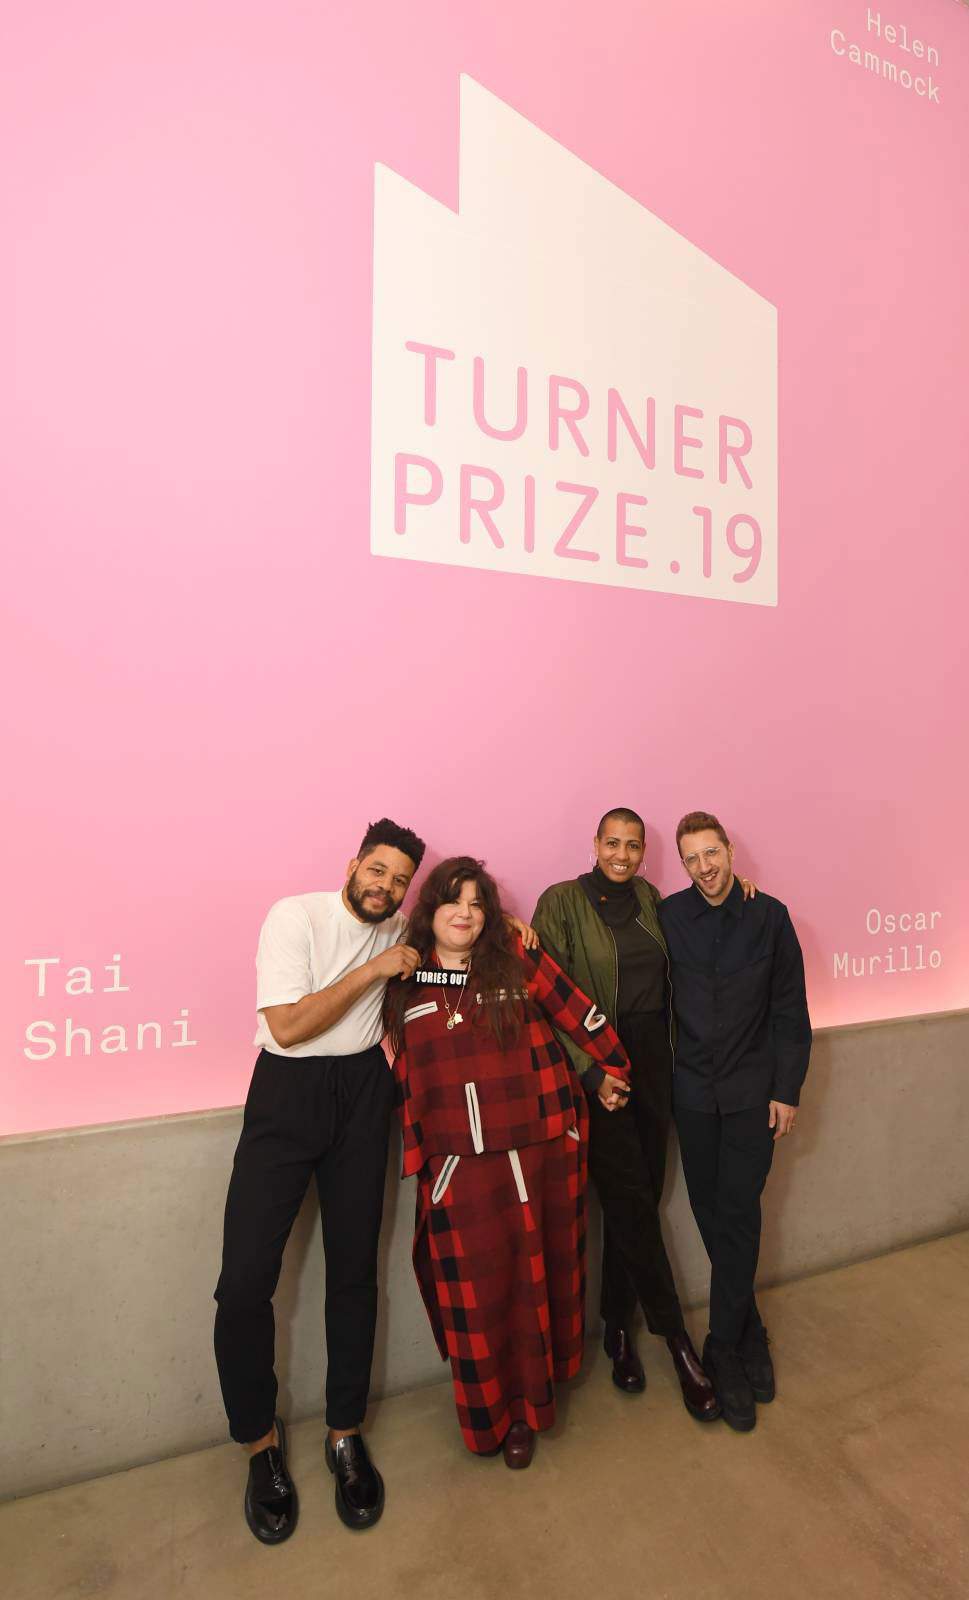 An act of sharing and solidarity at the 2019 Turner Prize: winners all finalists